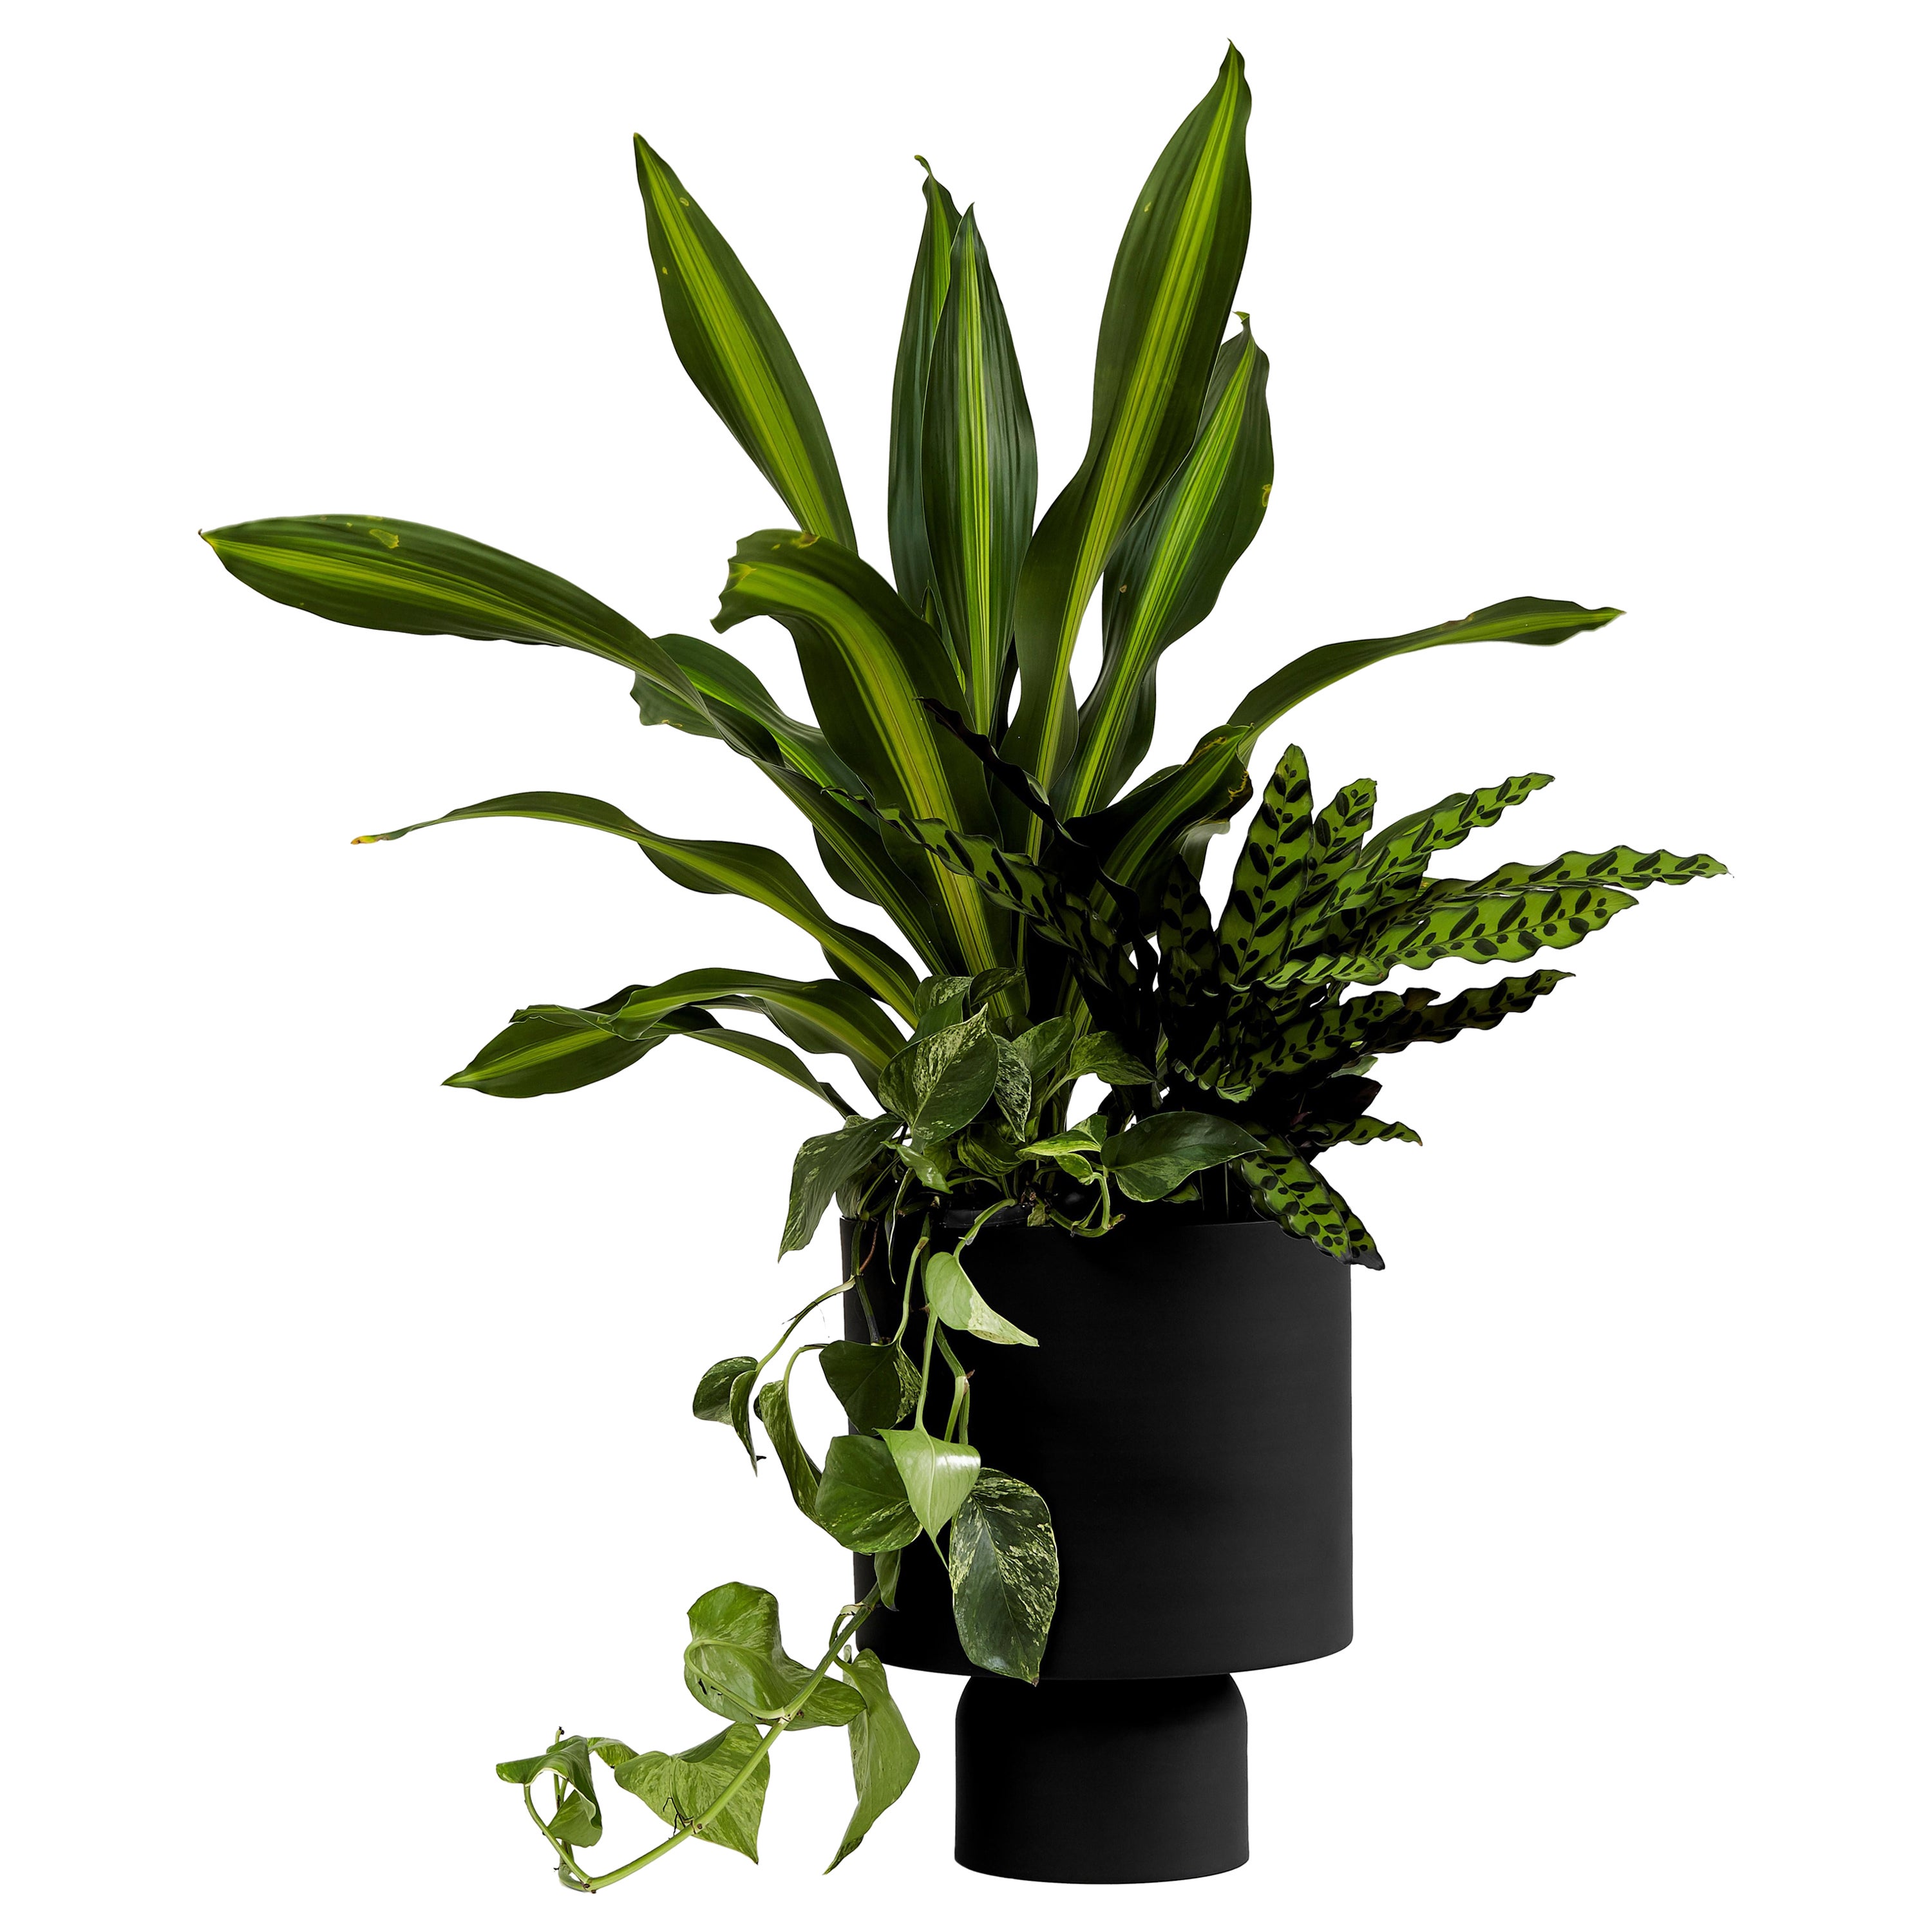 ADA planter was made in a metal spinning process out of aluminum. They come in four types, all can be filled from both sides, allowing for endless combinations from cactus as well as palm trees. 
The planter edition is available in black and